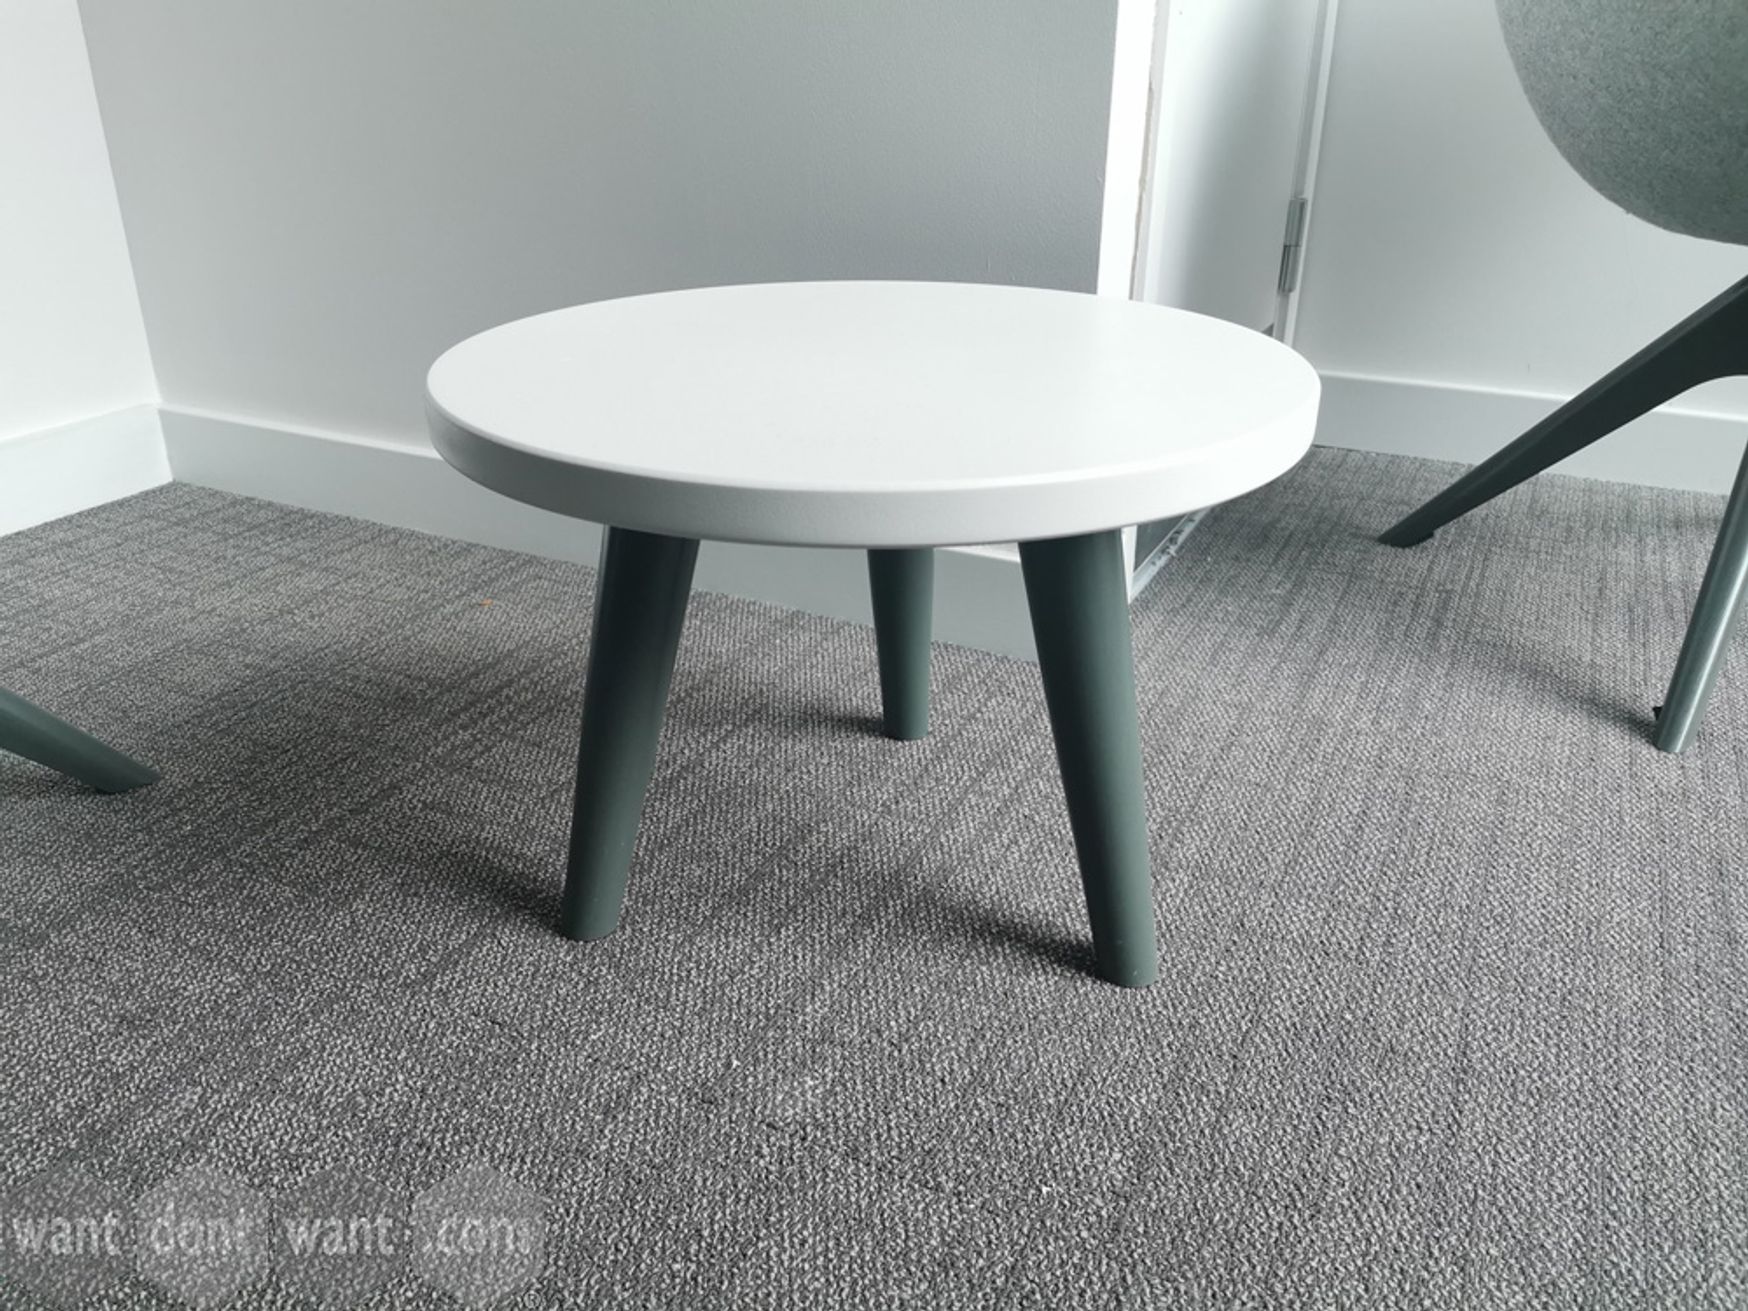 Used Sixteen3 Coffee table with white top and grey legs.